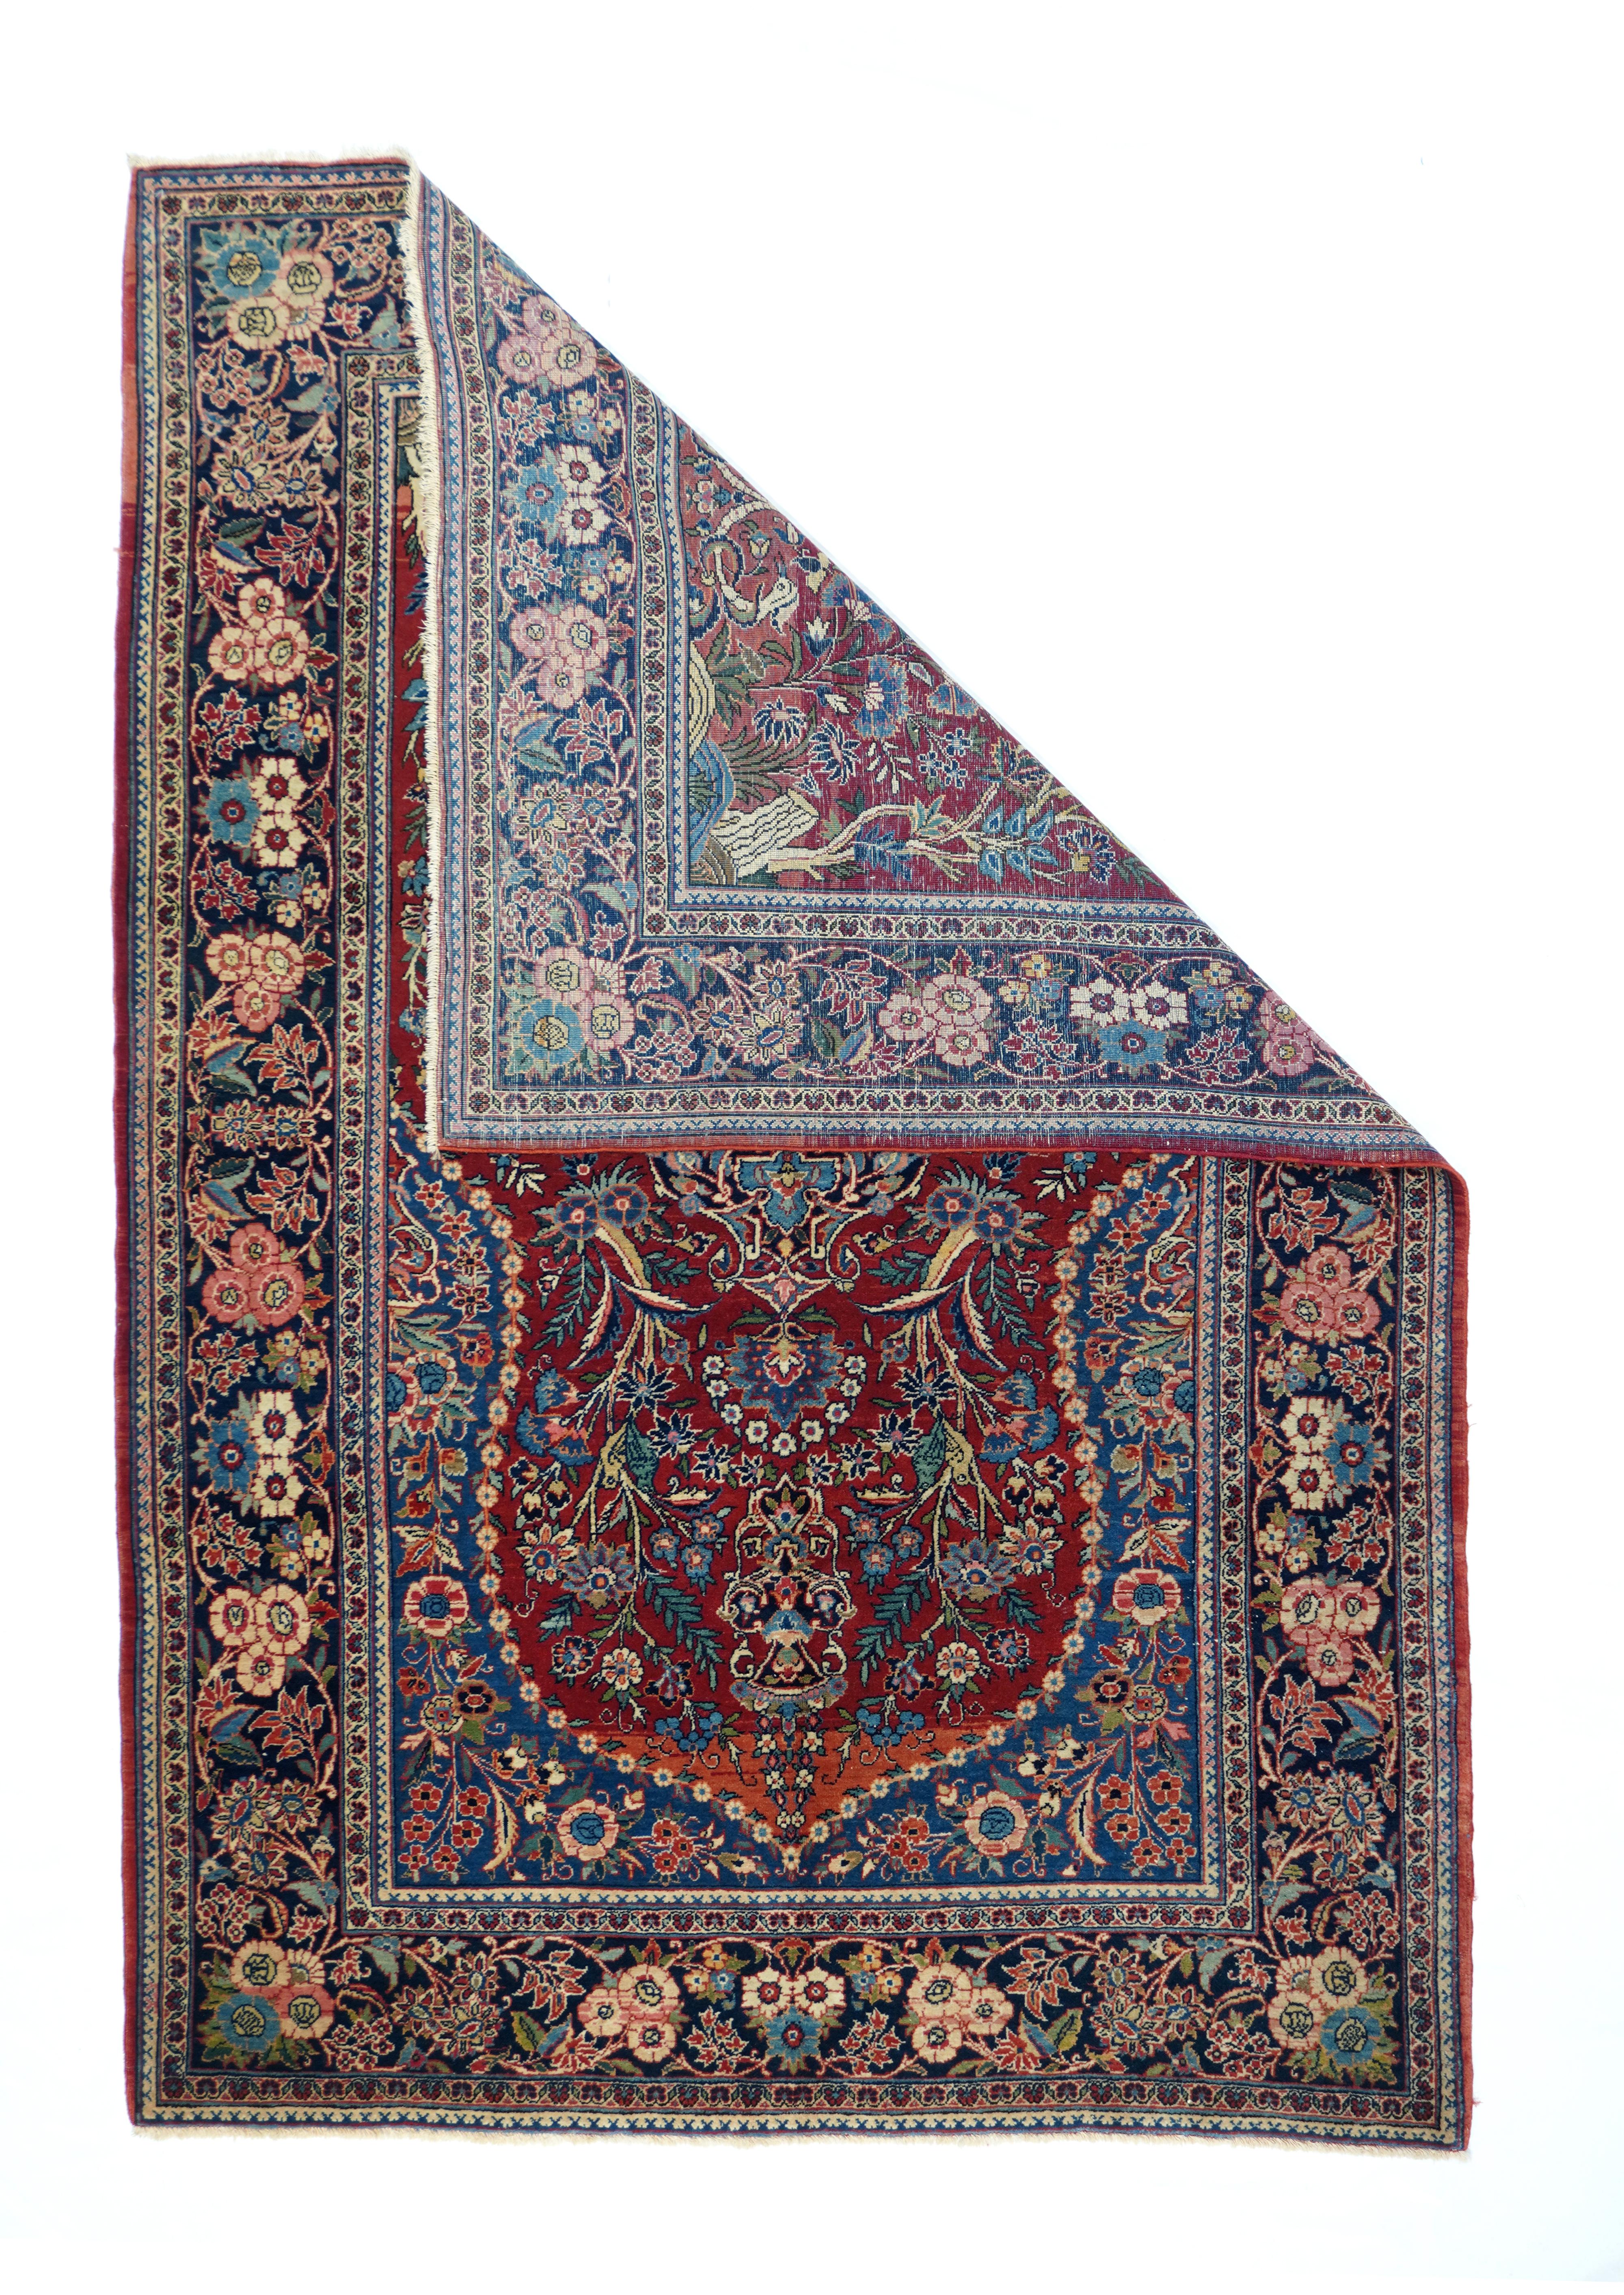 Vintage Kashan rug 4'.4'' x 6.6''. The lightly pinched pointed red niche field of this well-woven Central Persian town rug is based on a black amphora vase exuberantly developing full-face garden flowers, set beneath a navy arabesque cartouche and